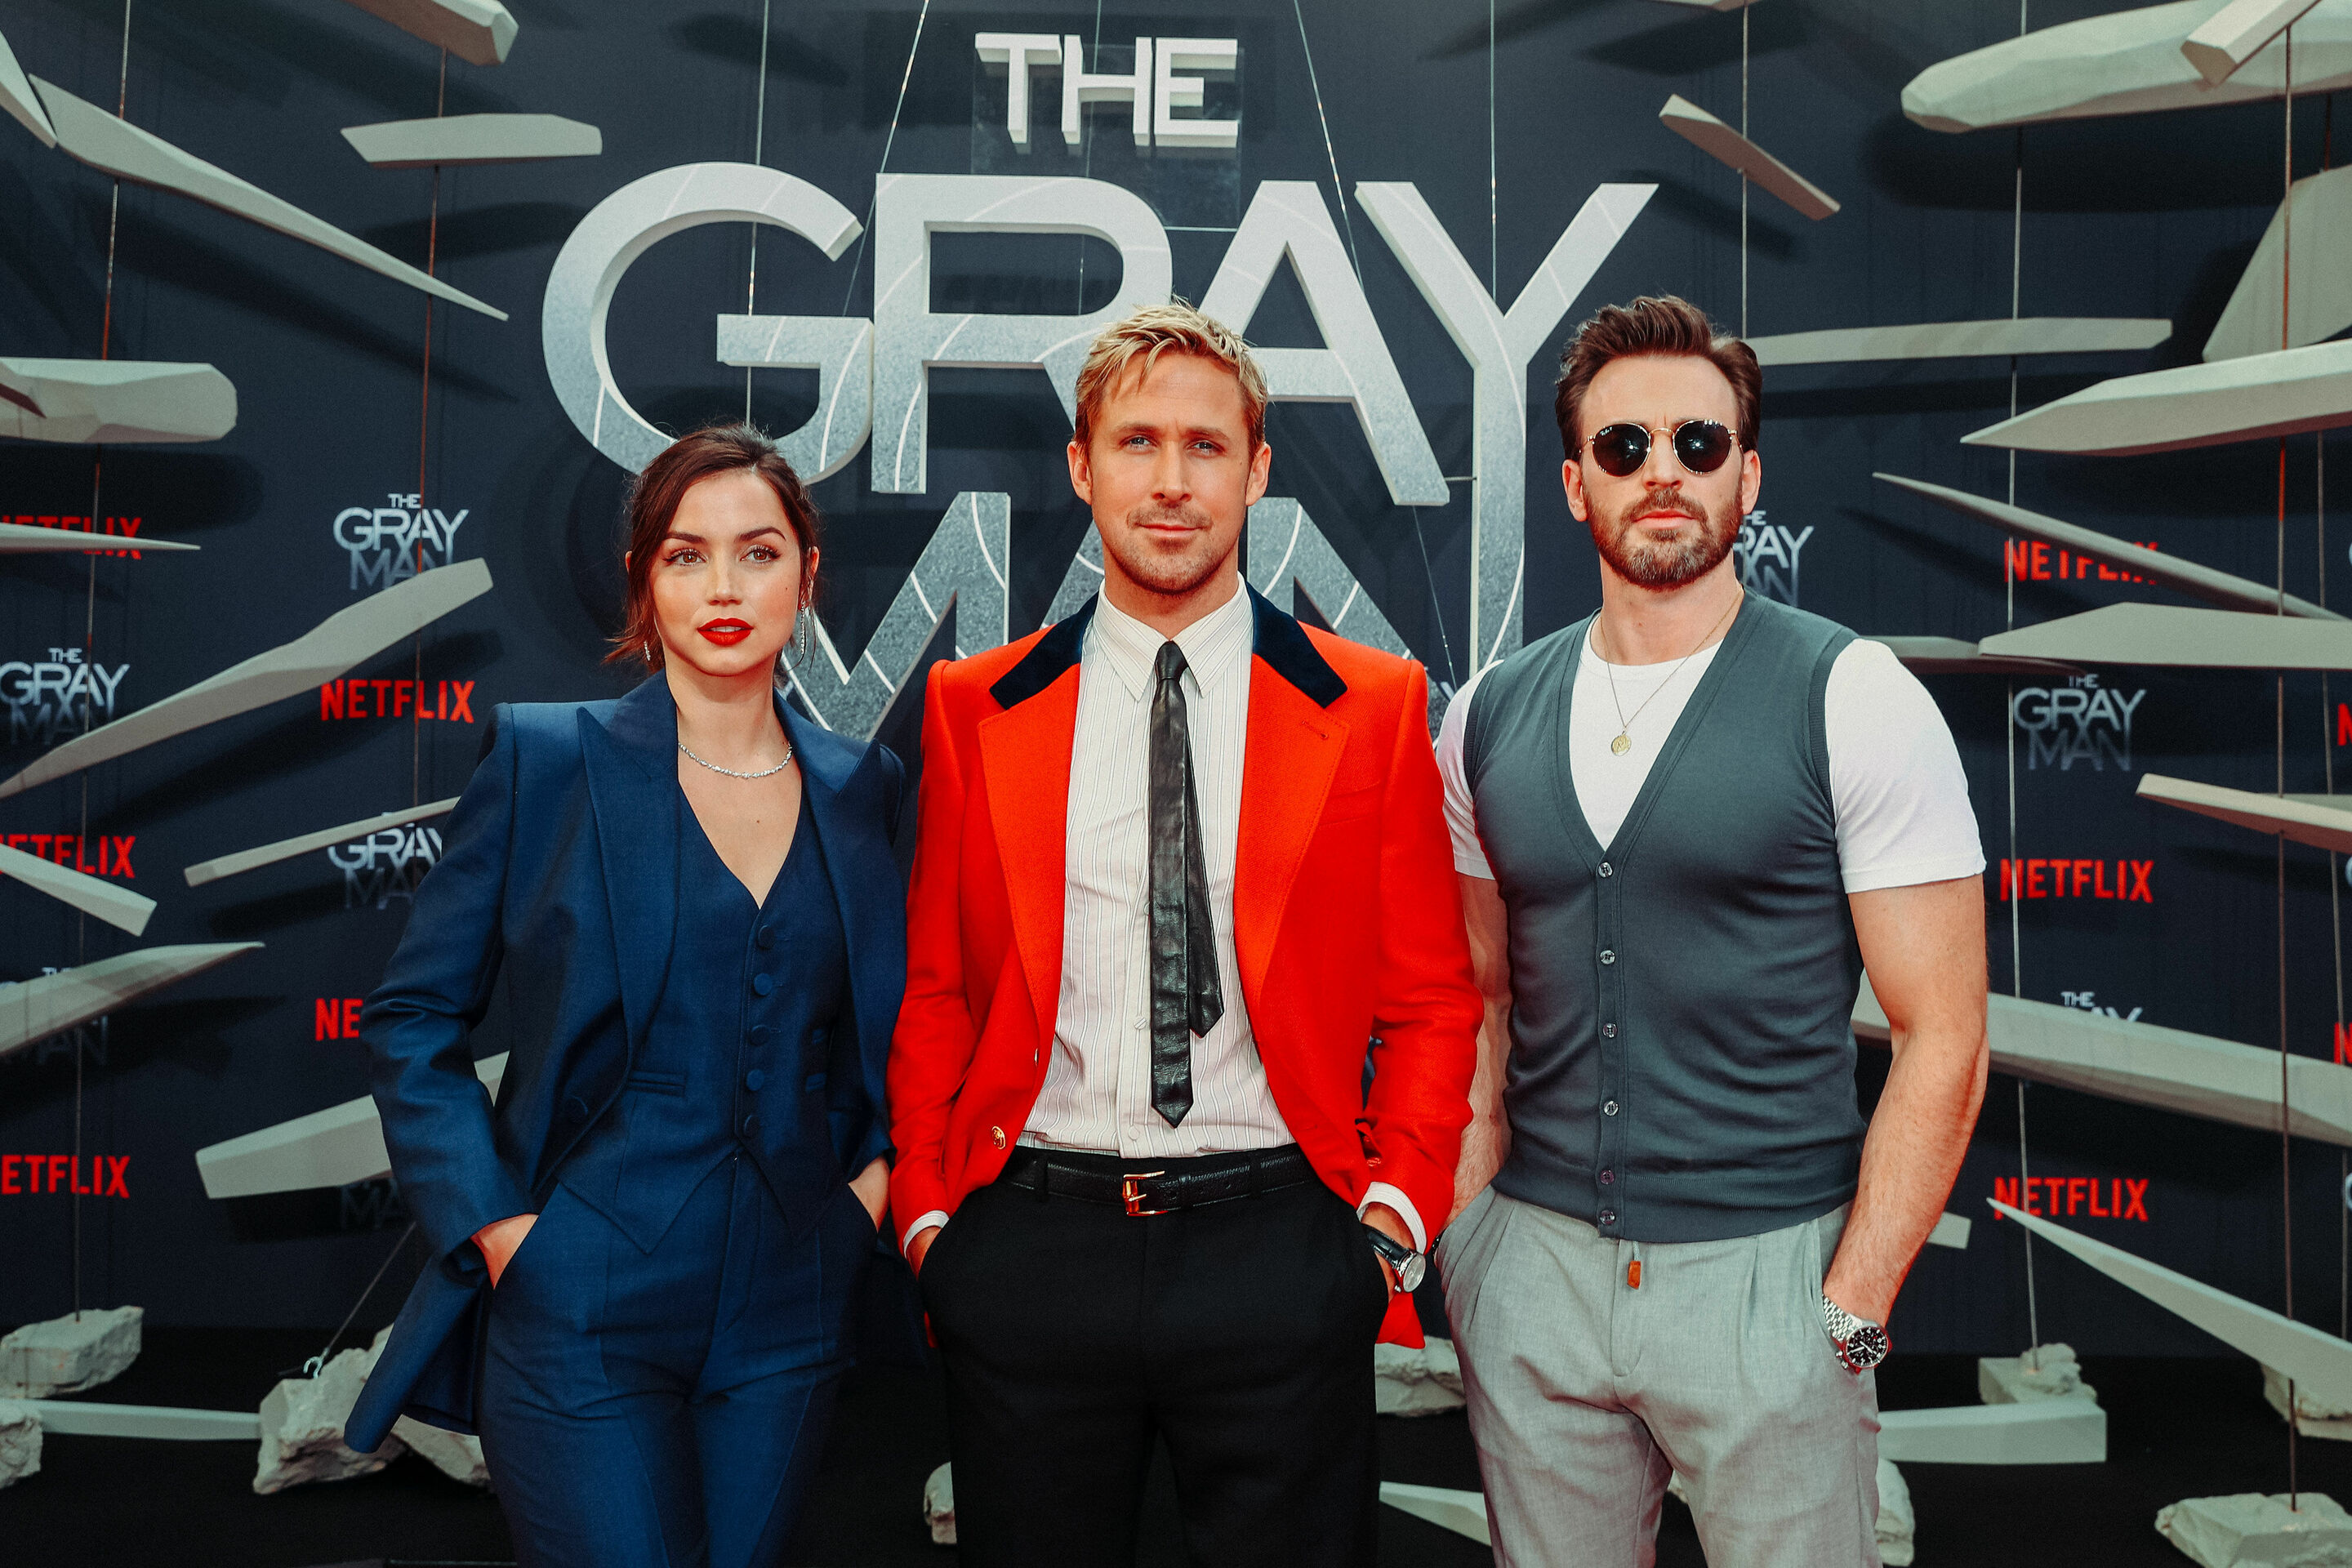 Audi Teams up with Netflix on “The Gray Man” as the Official Automotive Brand featured in the Film